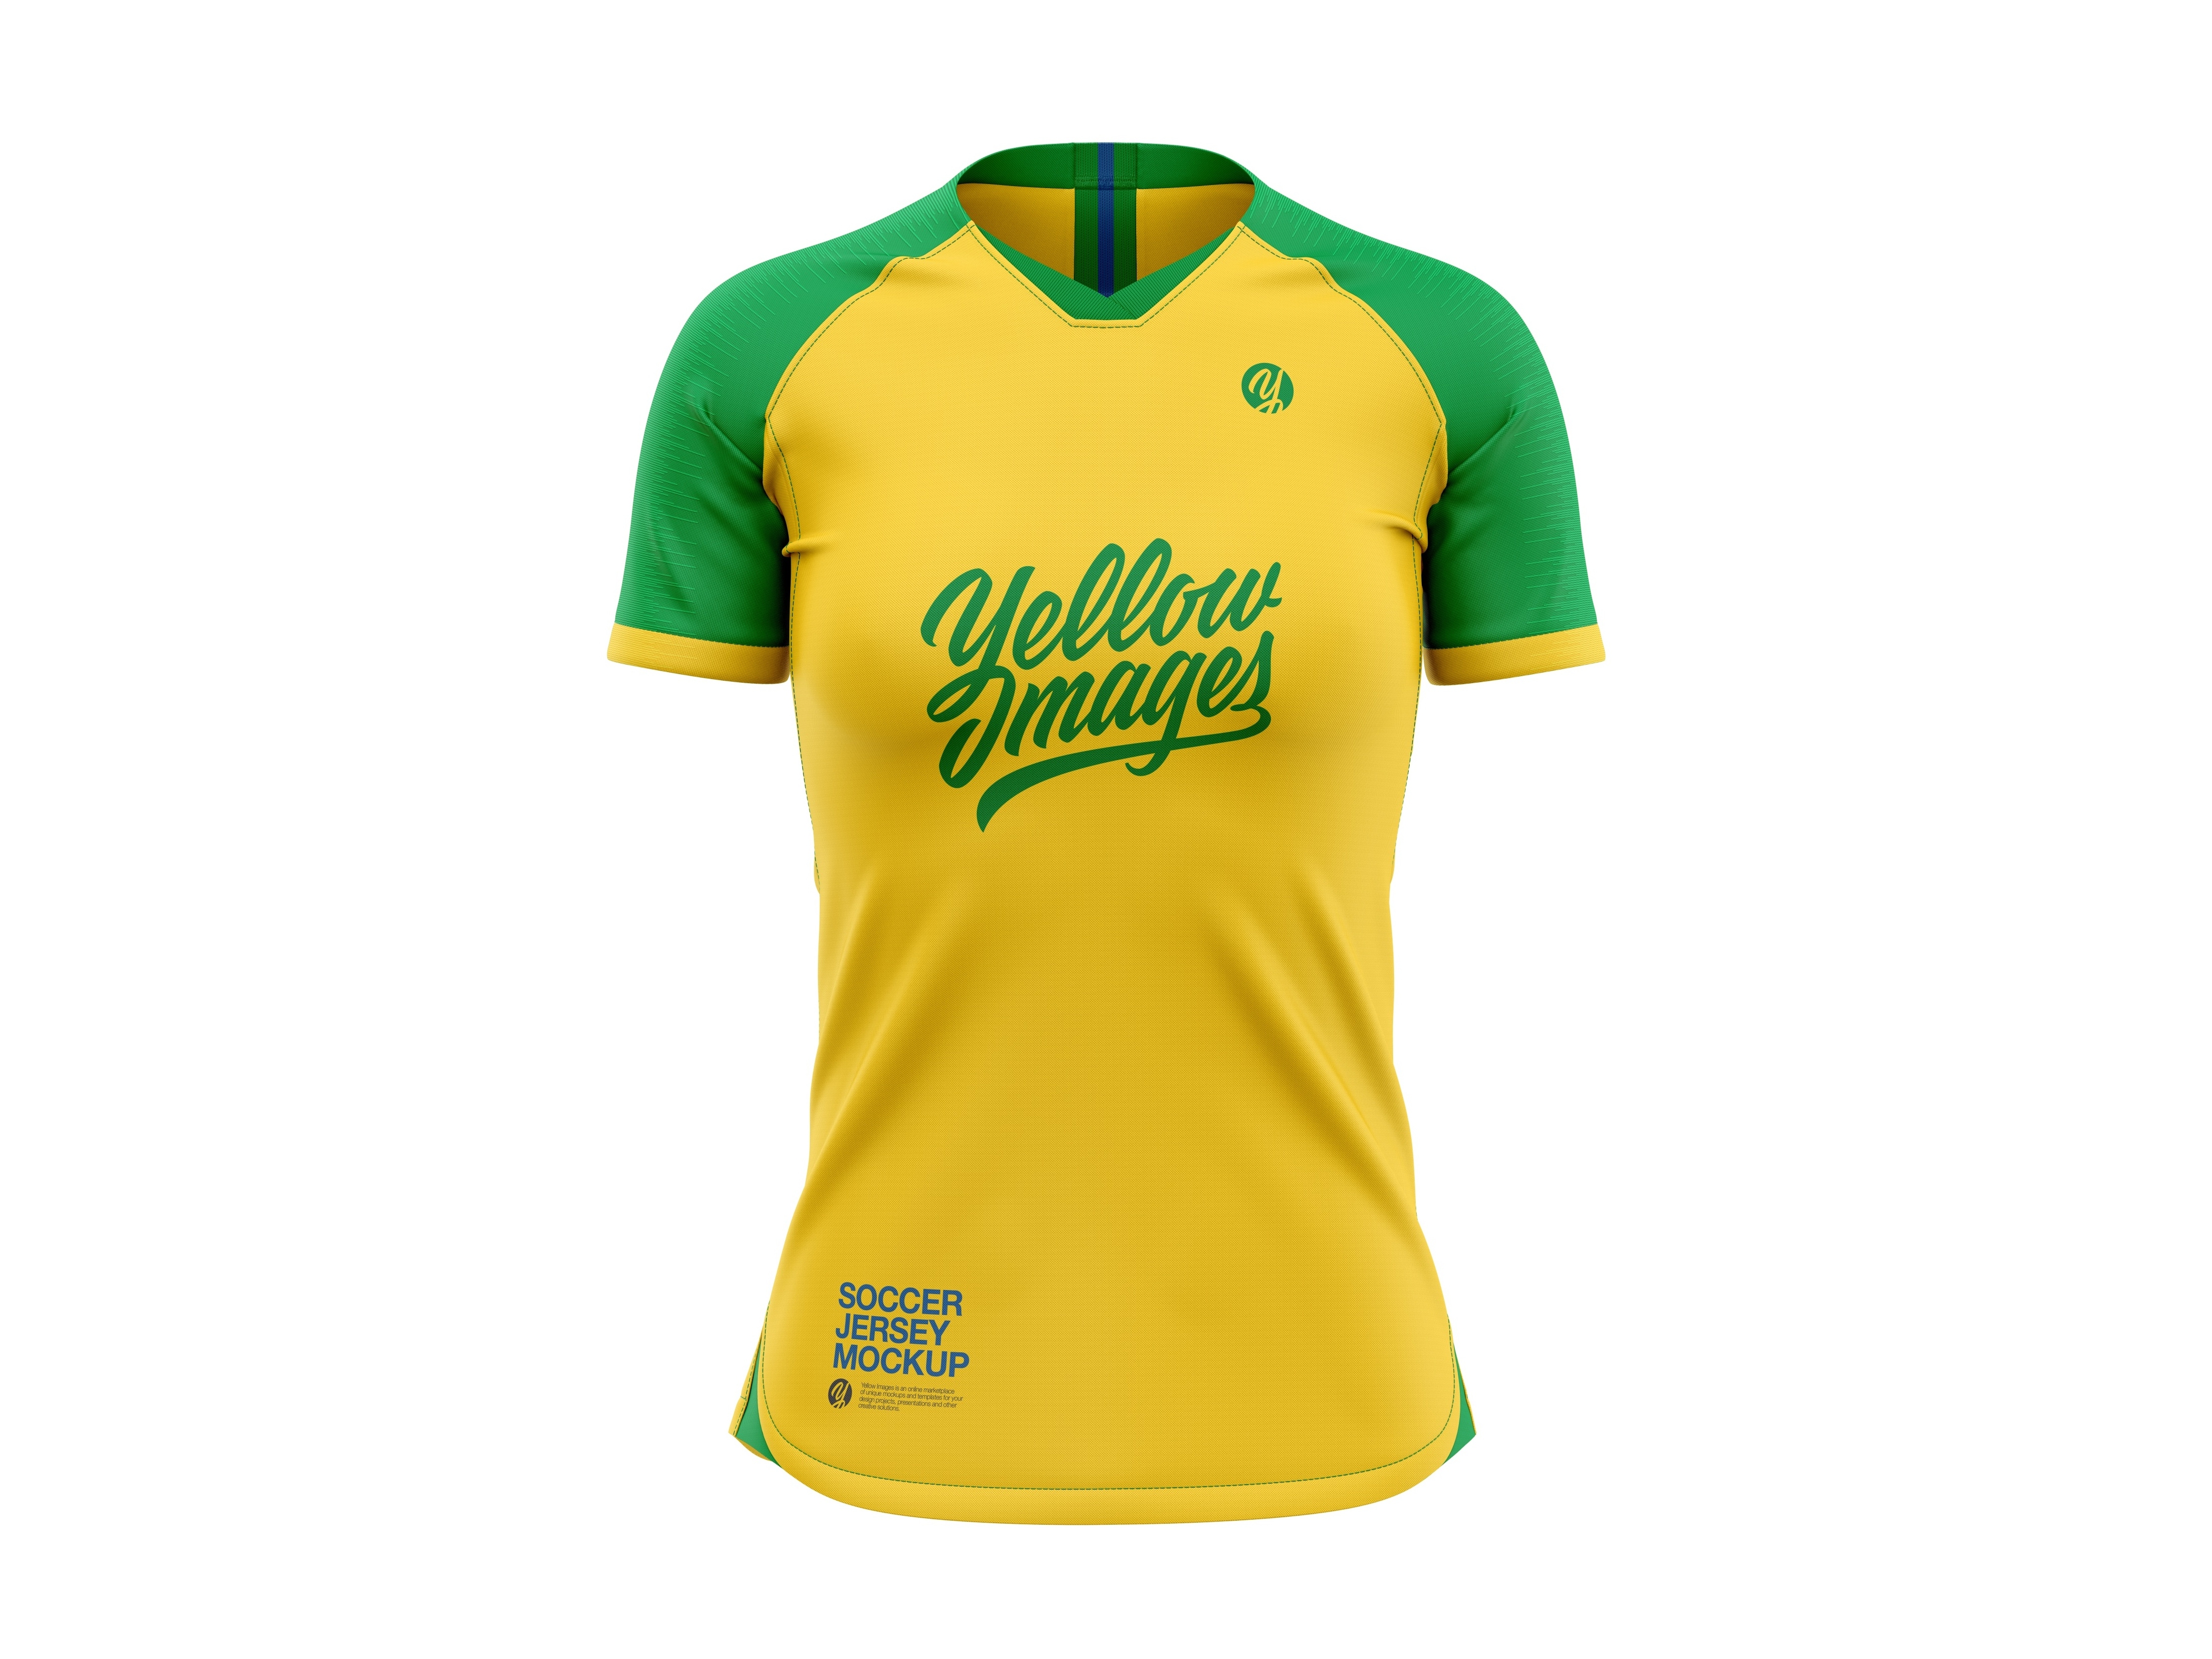 Download Women S Soccer Jersey Mockup By Cg Tailor On Dribbble PSD Mockup Templates